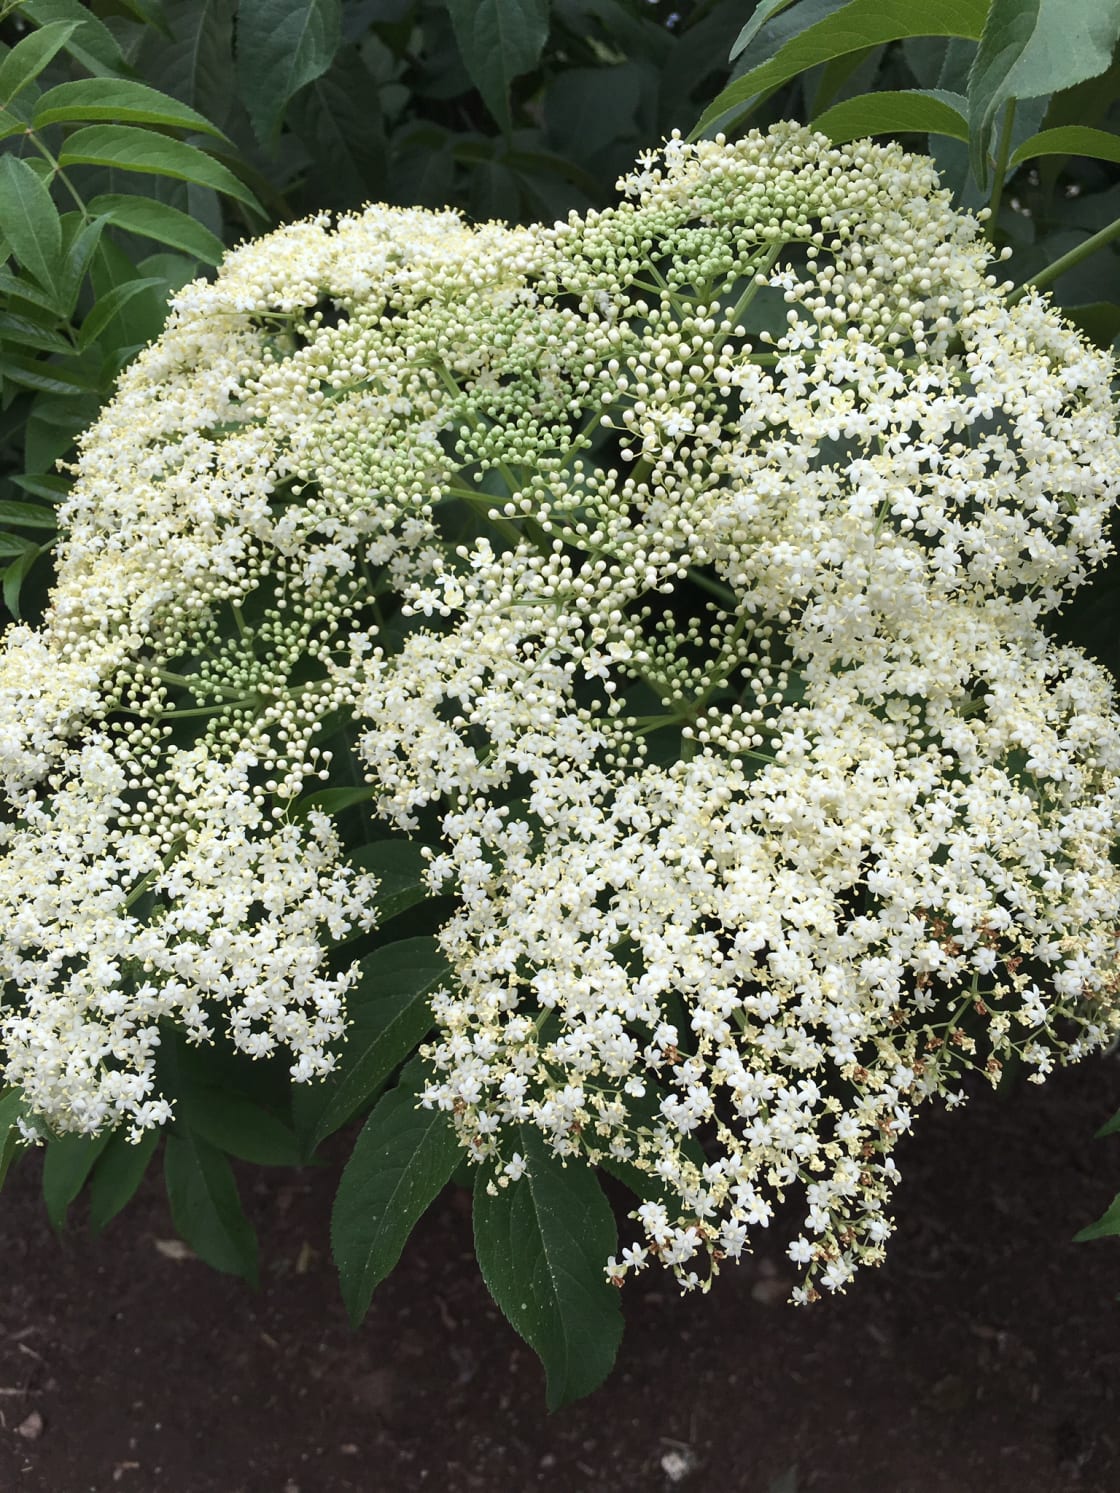 Native Alabama Elderflowers.  Breath of Life Farm is blessed with this beautiful medicinal plant.  We are building our elder orchard to supply the berries for our healthful Elderberry Tonics. 